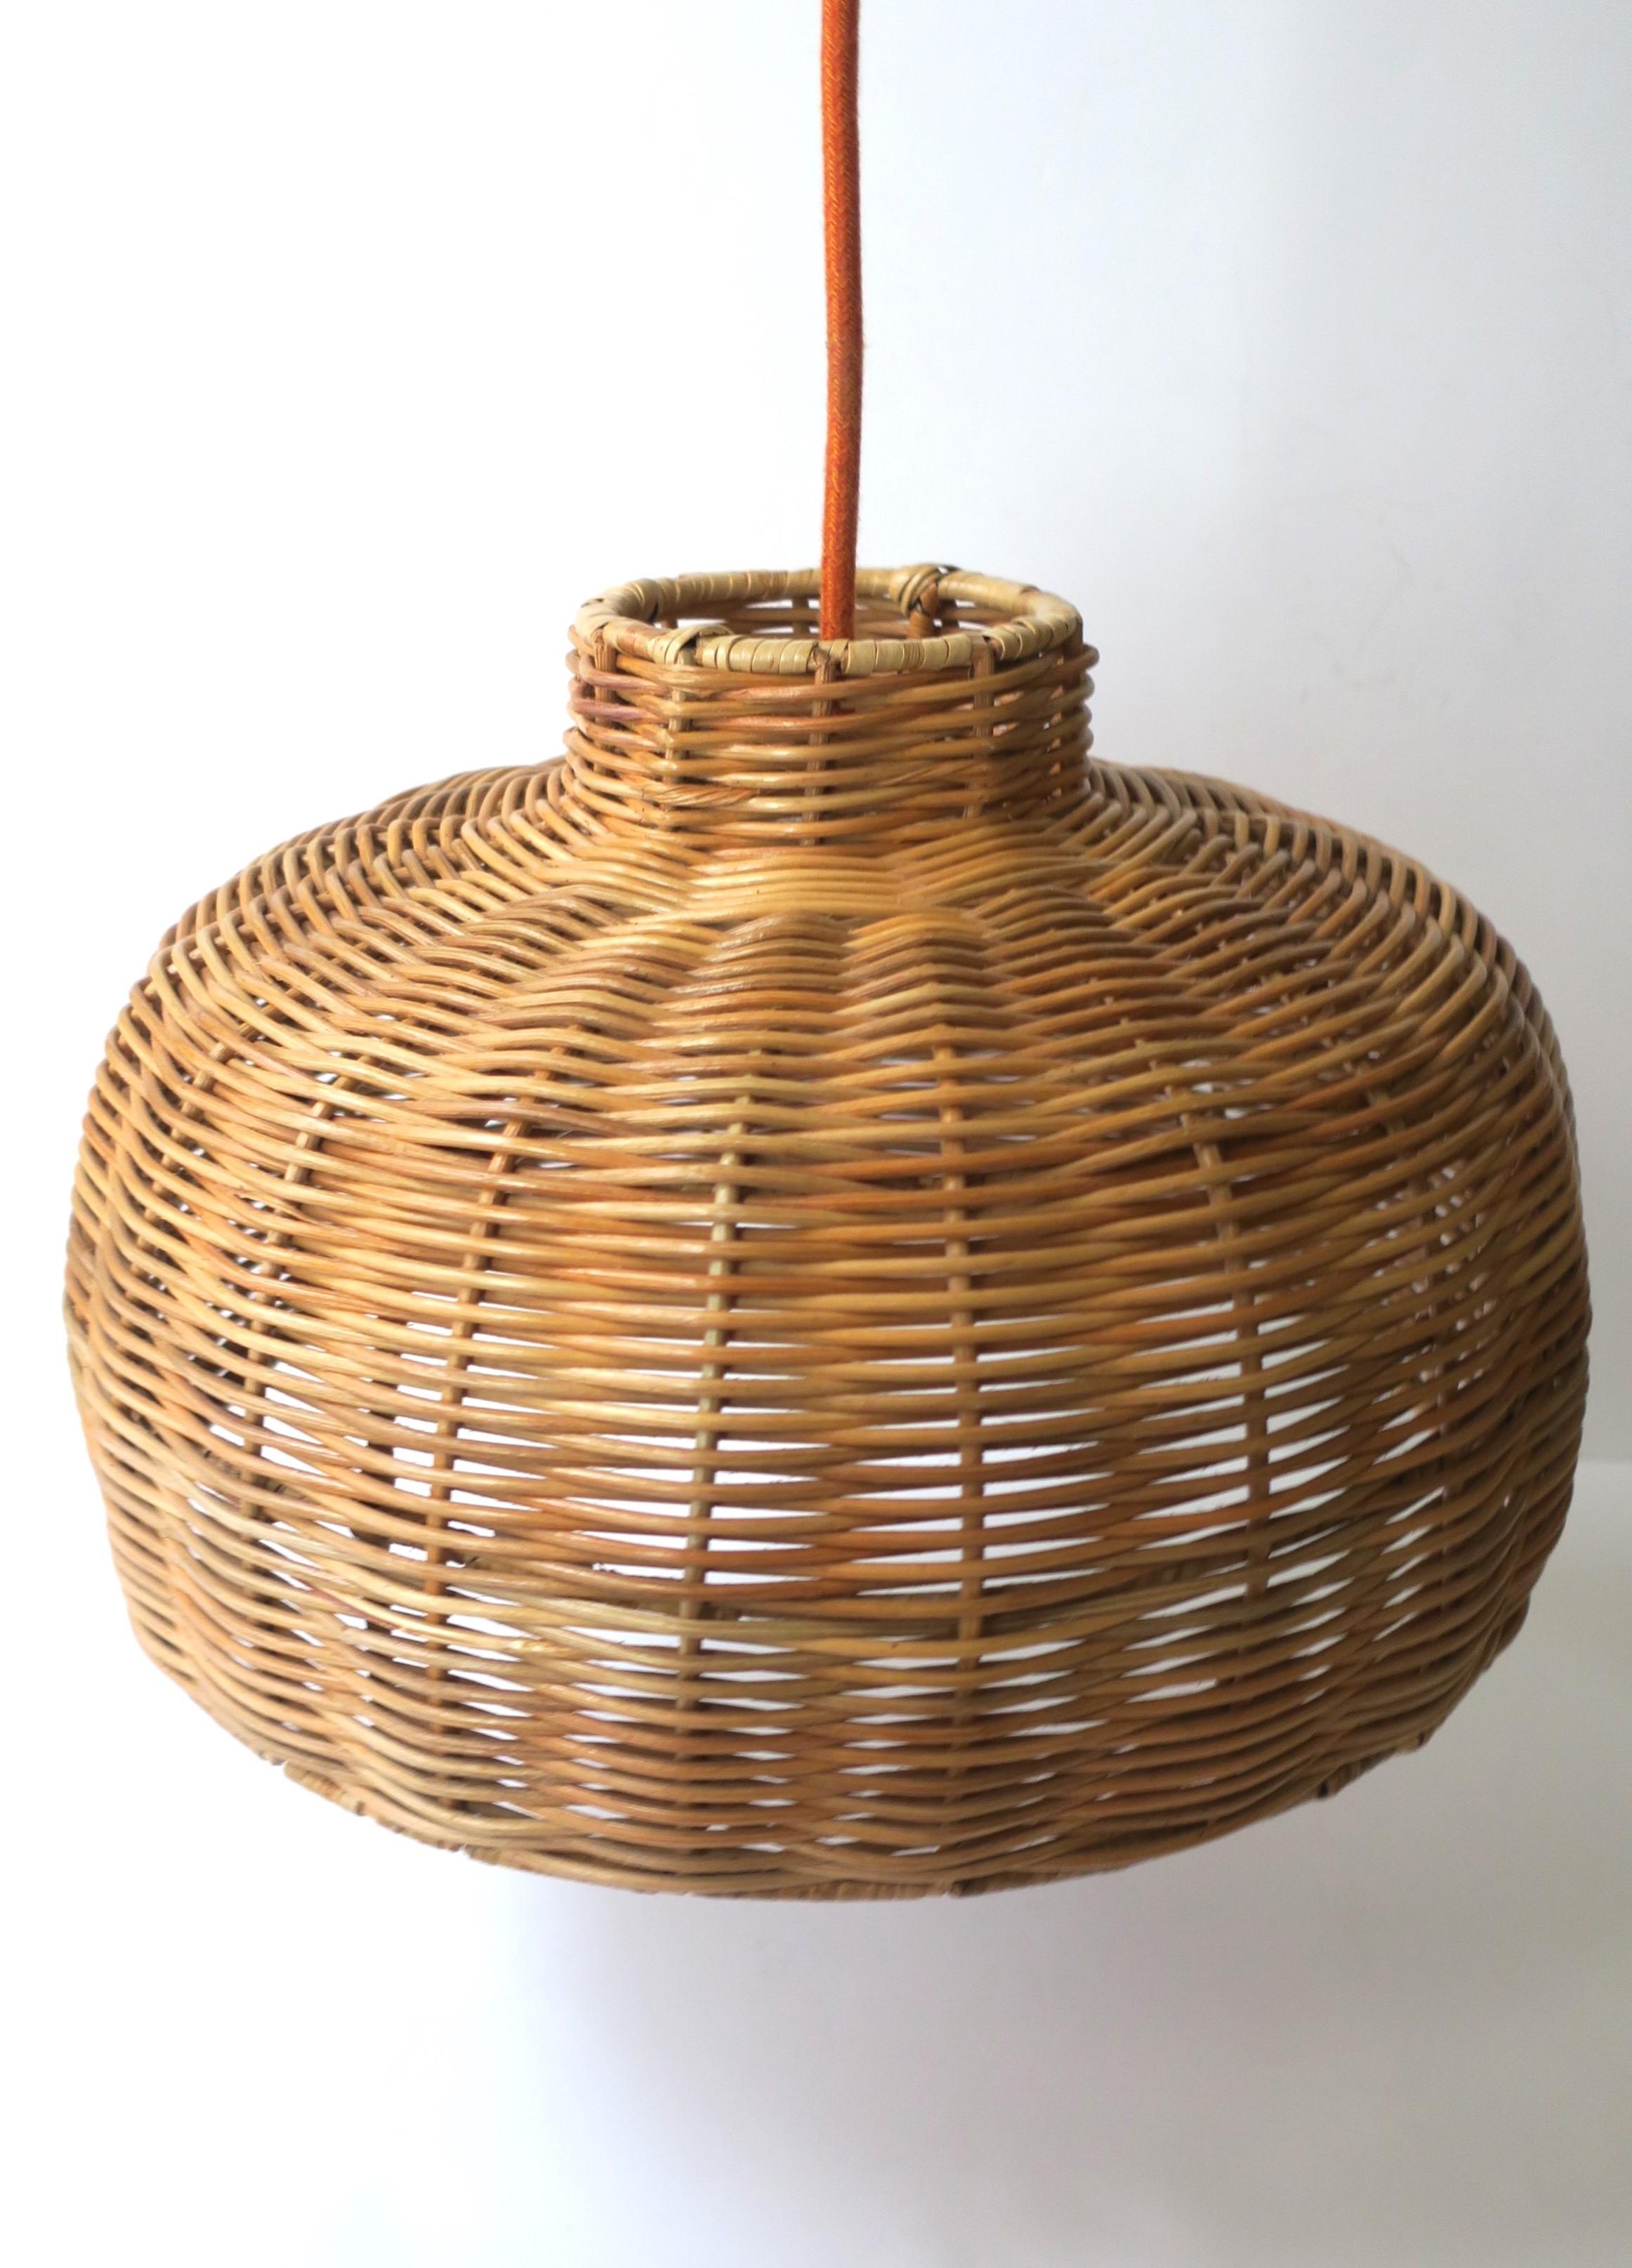 A round wicker chandelier pendant light with plug-in capability (to electrical outlet.) This round wicker chandelier pendant light supports one standard bulb, on/off switch on orange cord (as shown in last image) and plug-in to electrical outlet.